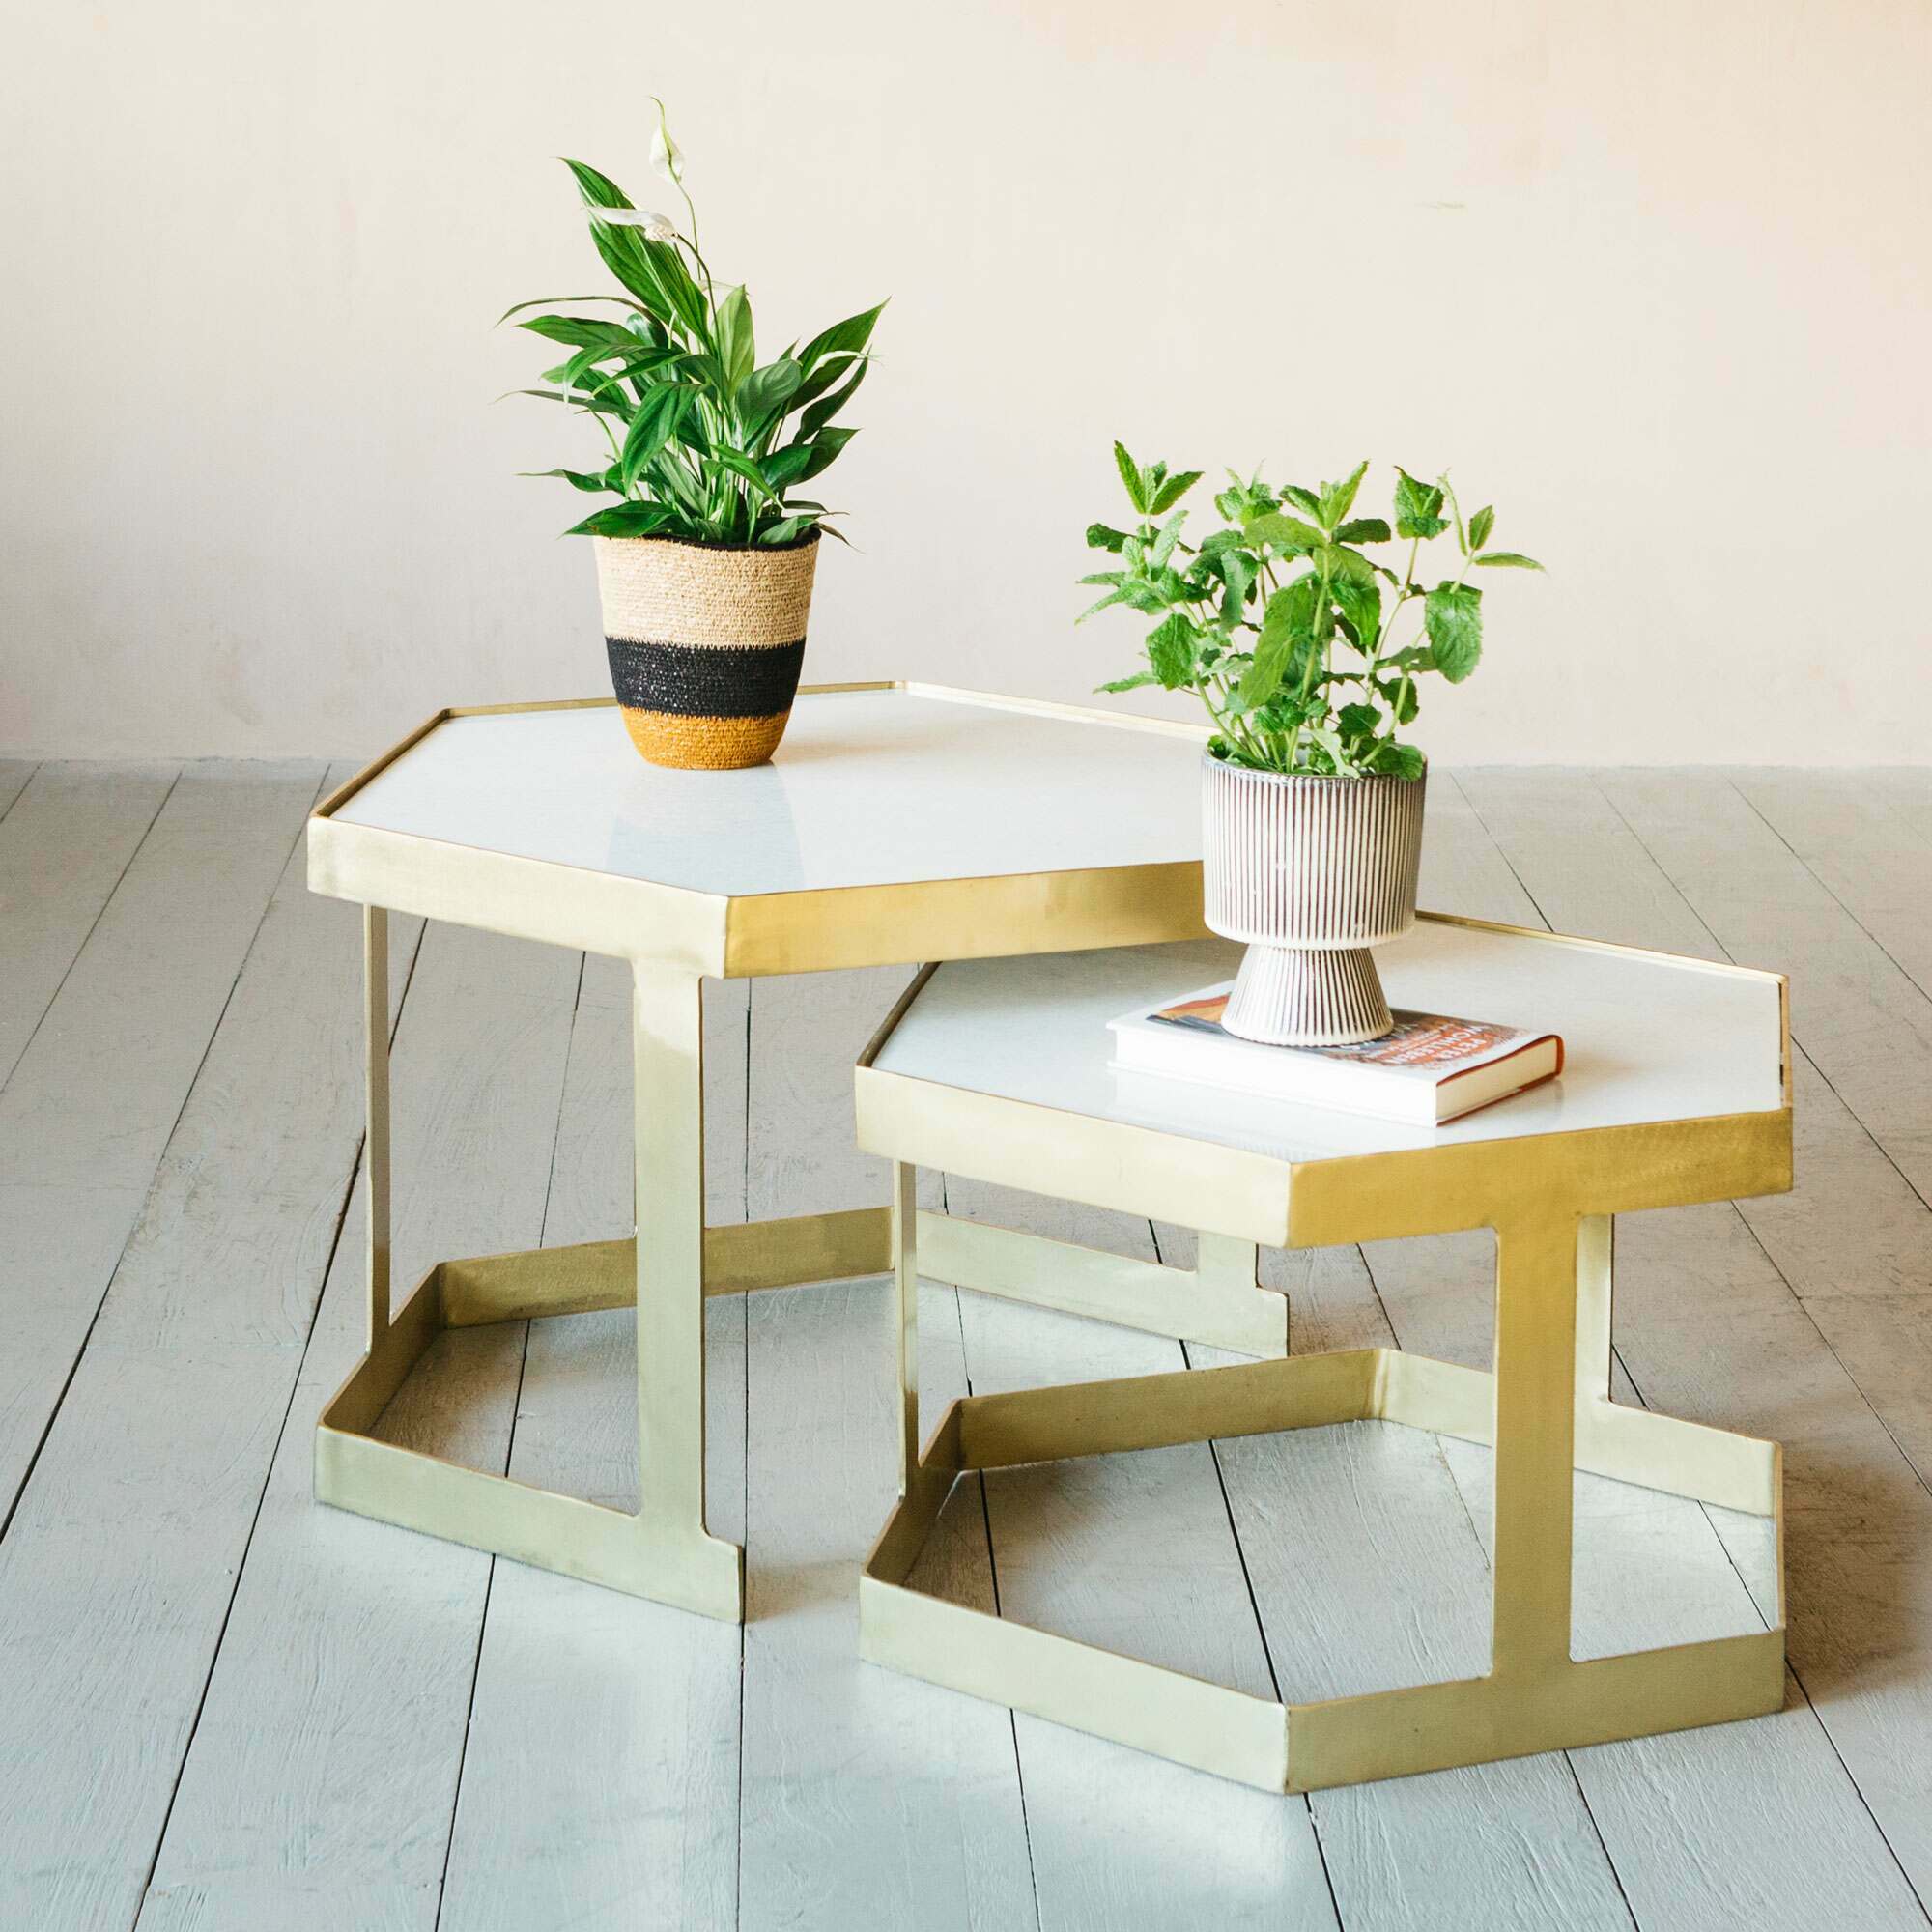 Read more about Graham and green set of two hexagonal marble coffee tables